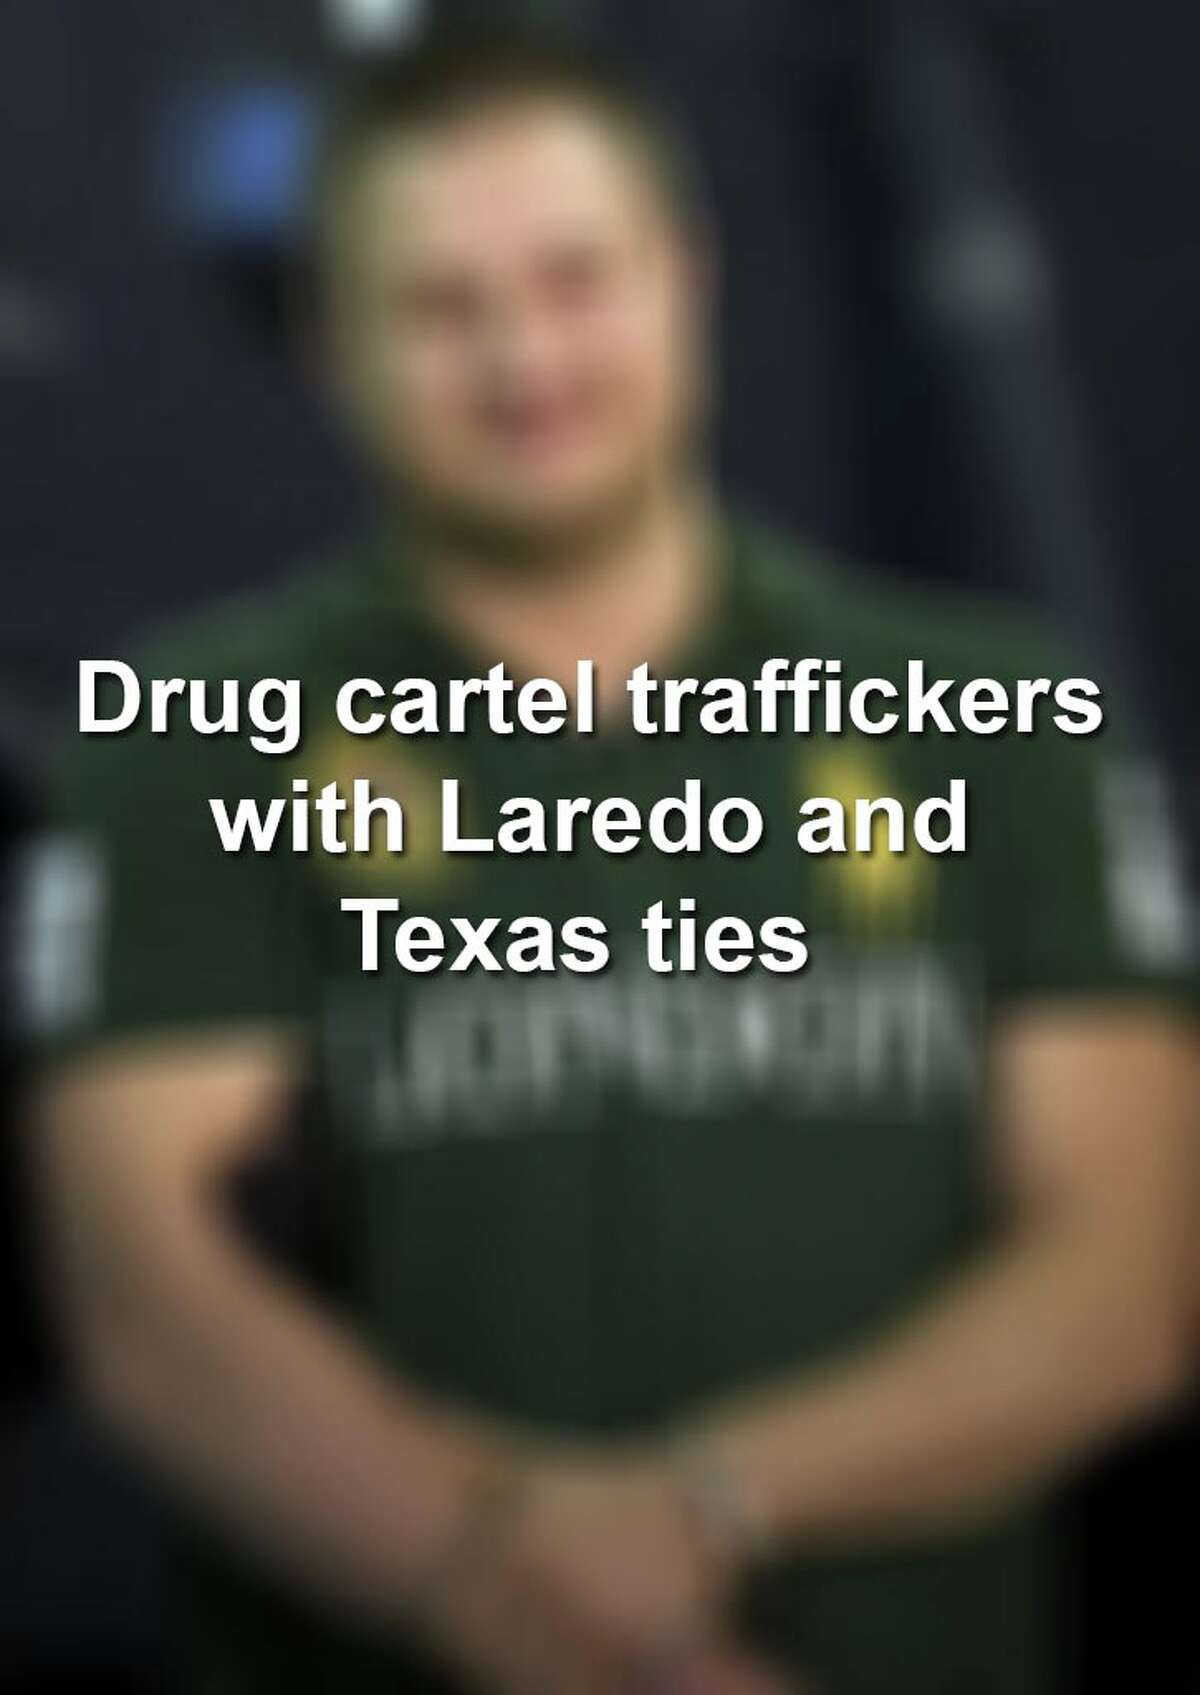 Scroll through the gallery to see cartel operatives who have ties to Laredo and Texas soil, according to the Organized Crime and Corruption Reporting Project's “Persona de Interés” database.